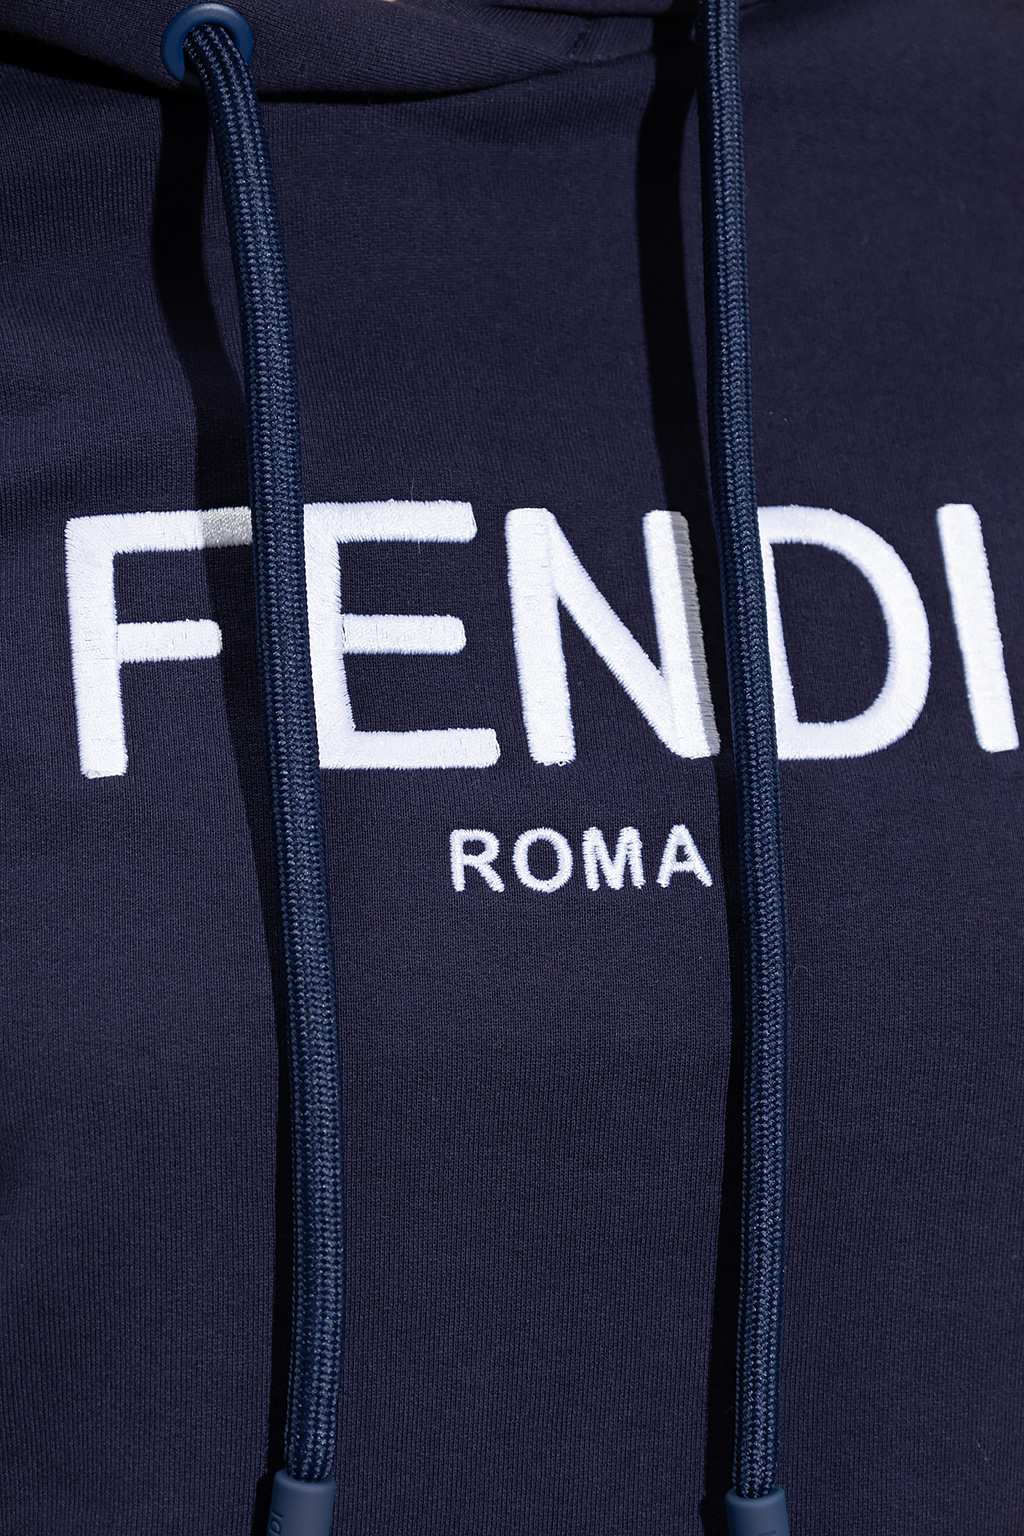 FENDI x Steccolecco Popsicle Pop-Up in Milan